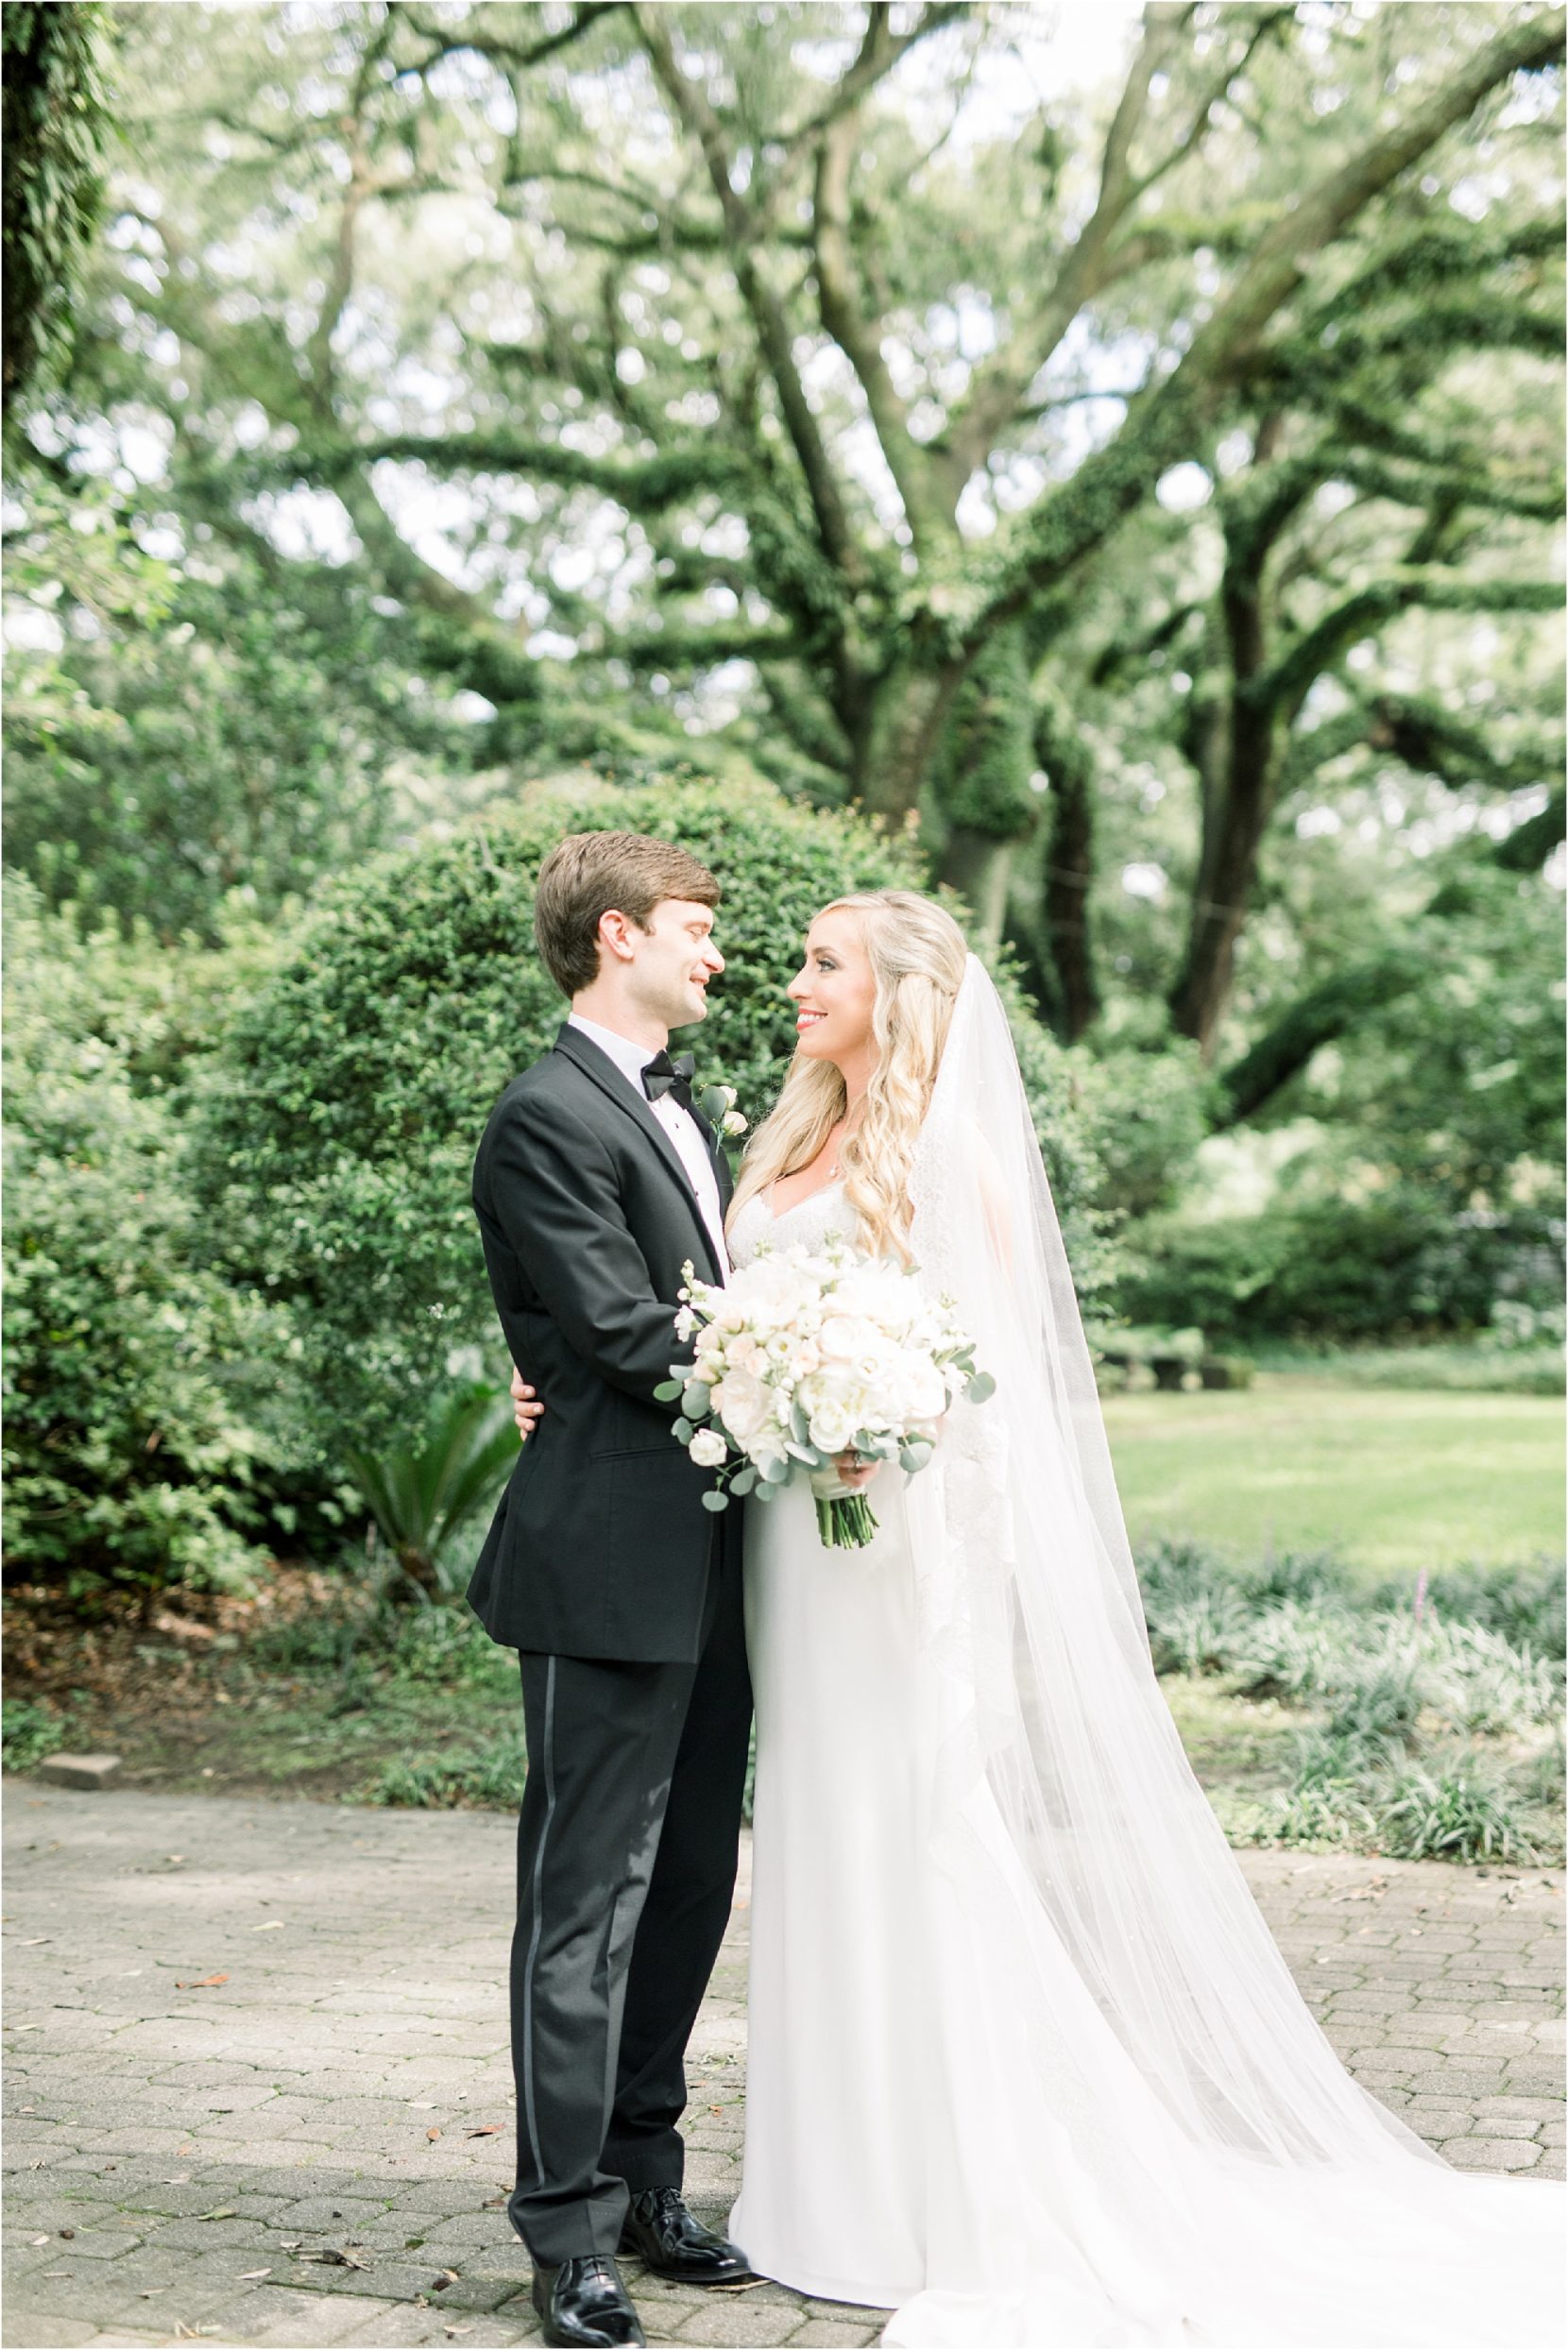 Mobile Alabama Wedding Photographer Jennie Tewell Photographer Cathedral of Immaculate Conception Richards DAR House Alabama Wedding Photographer 0010